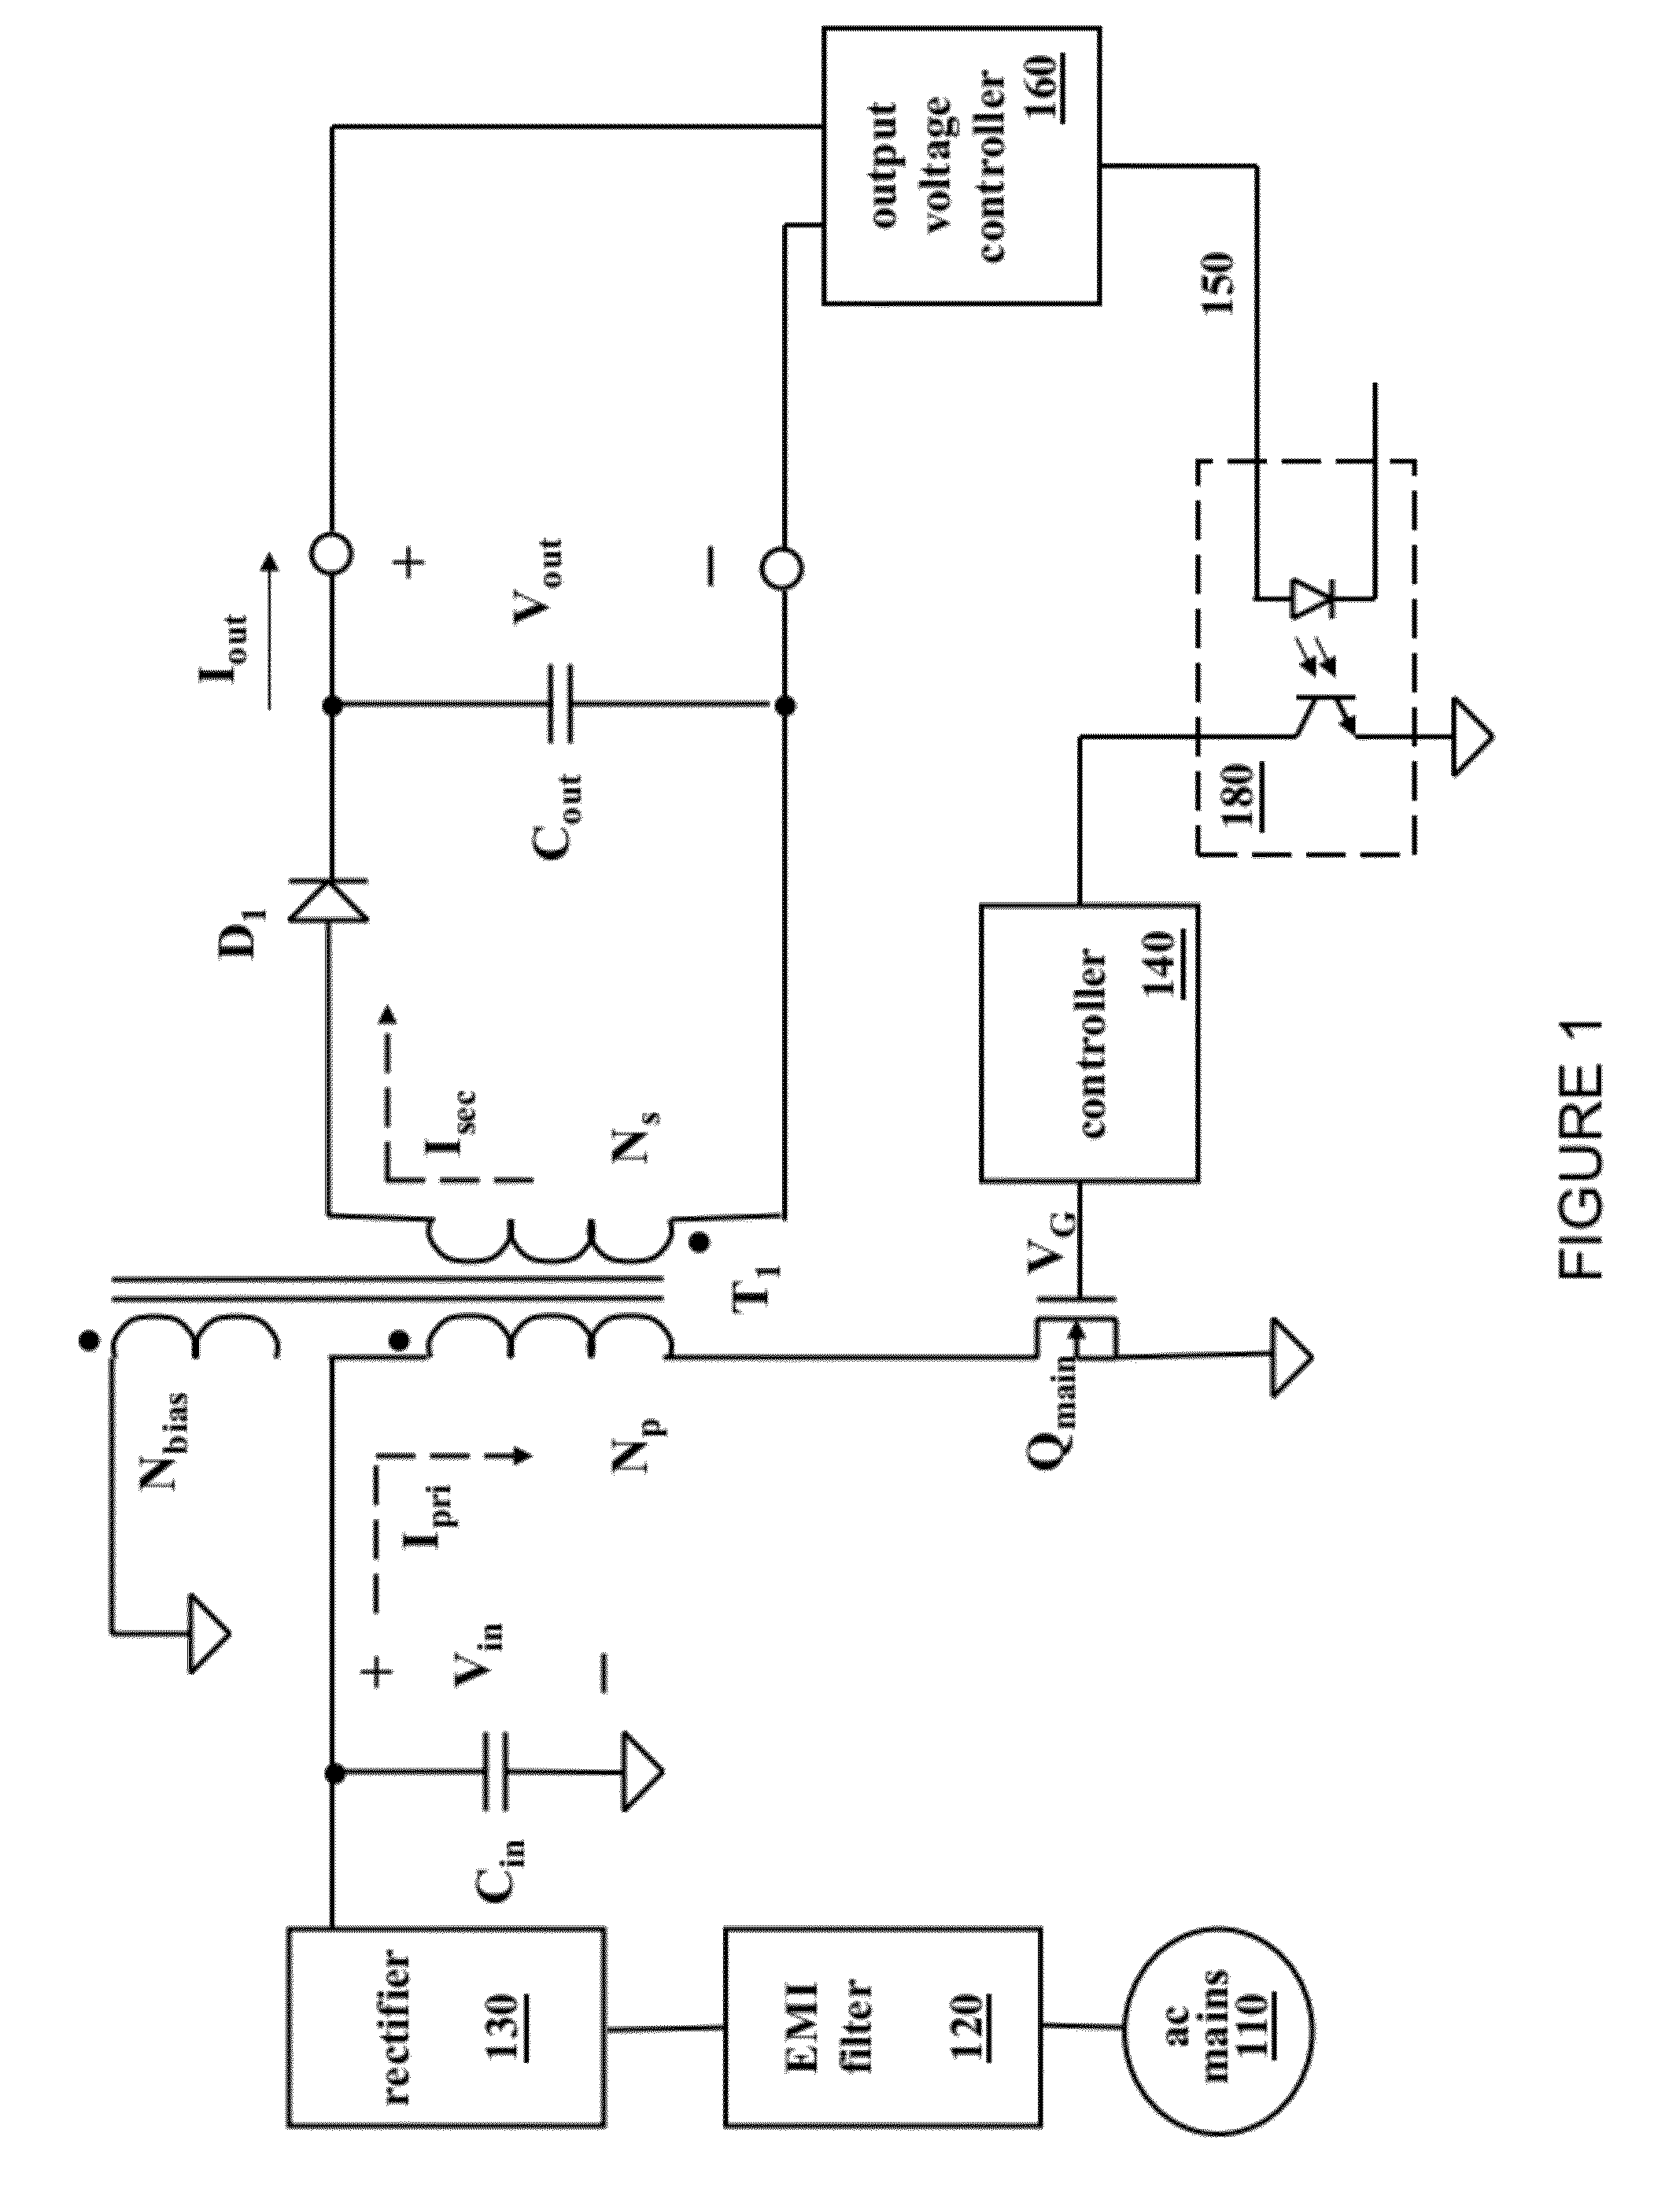 Power converter with reduced power dissipation